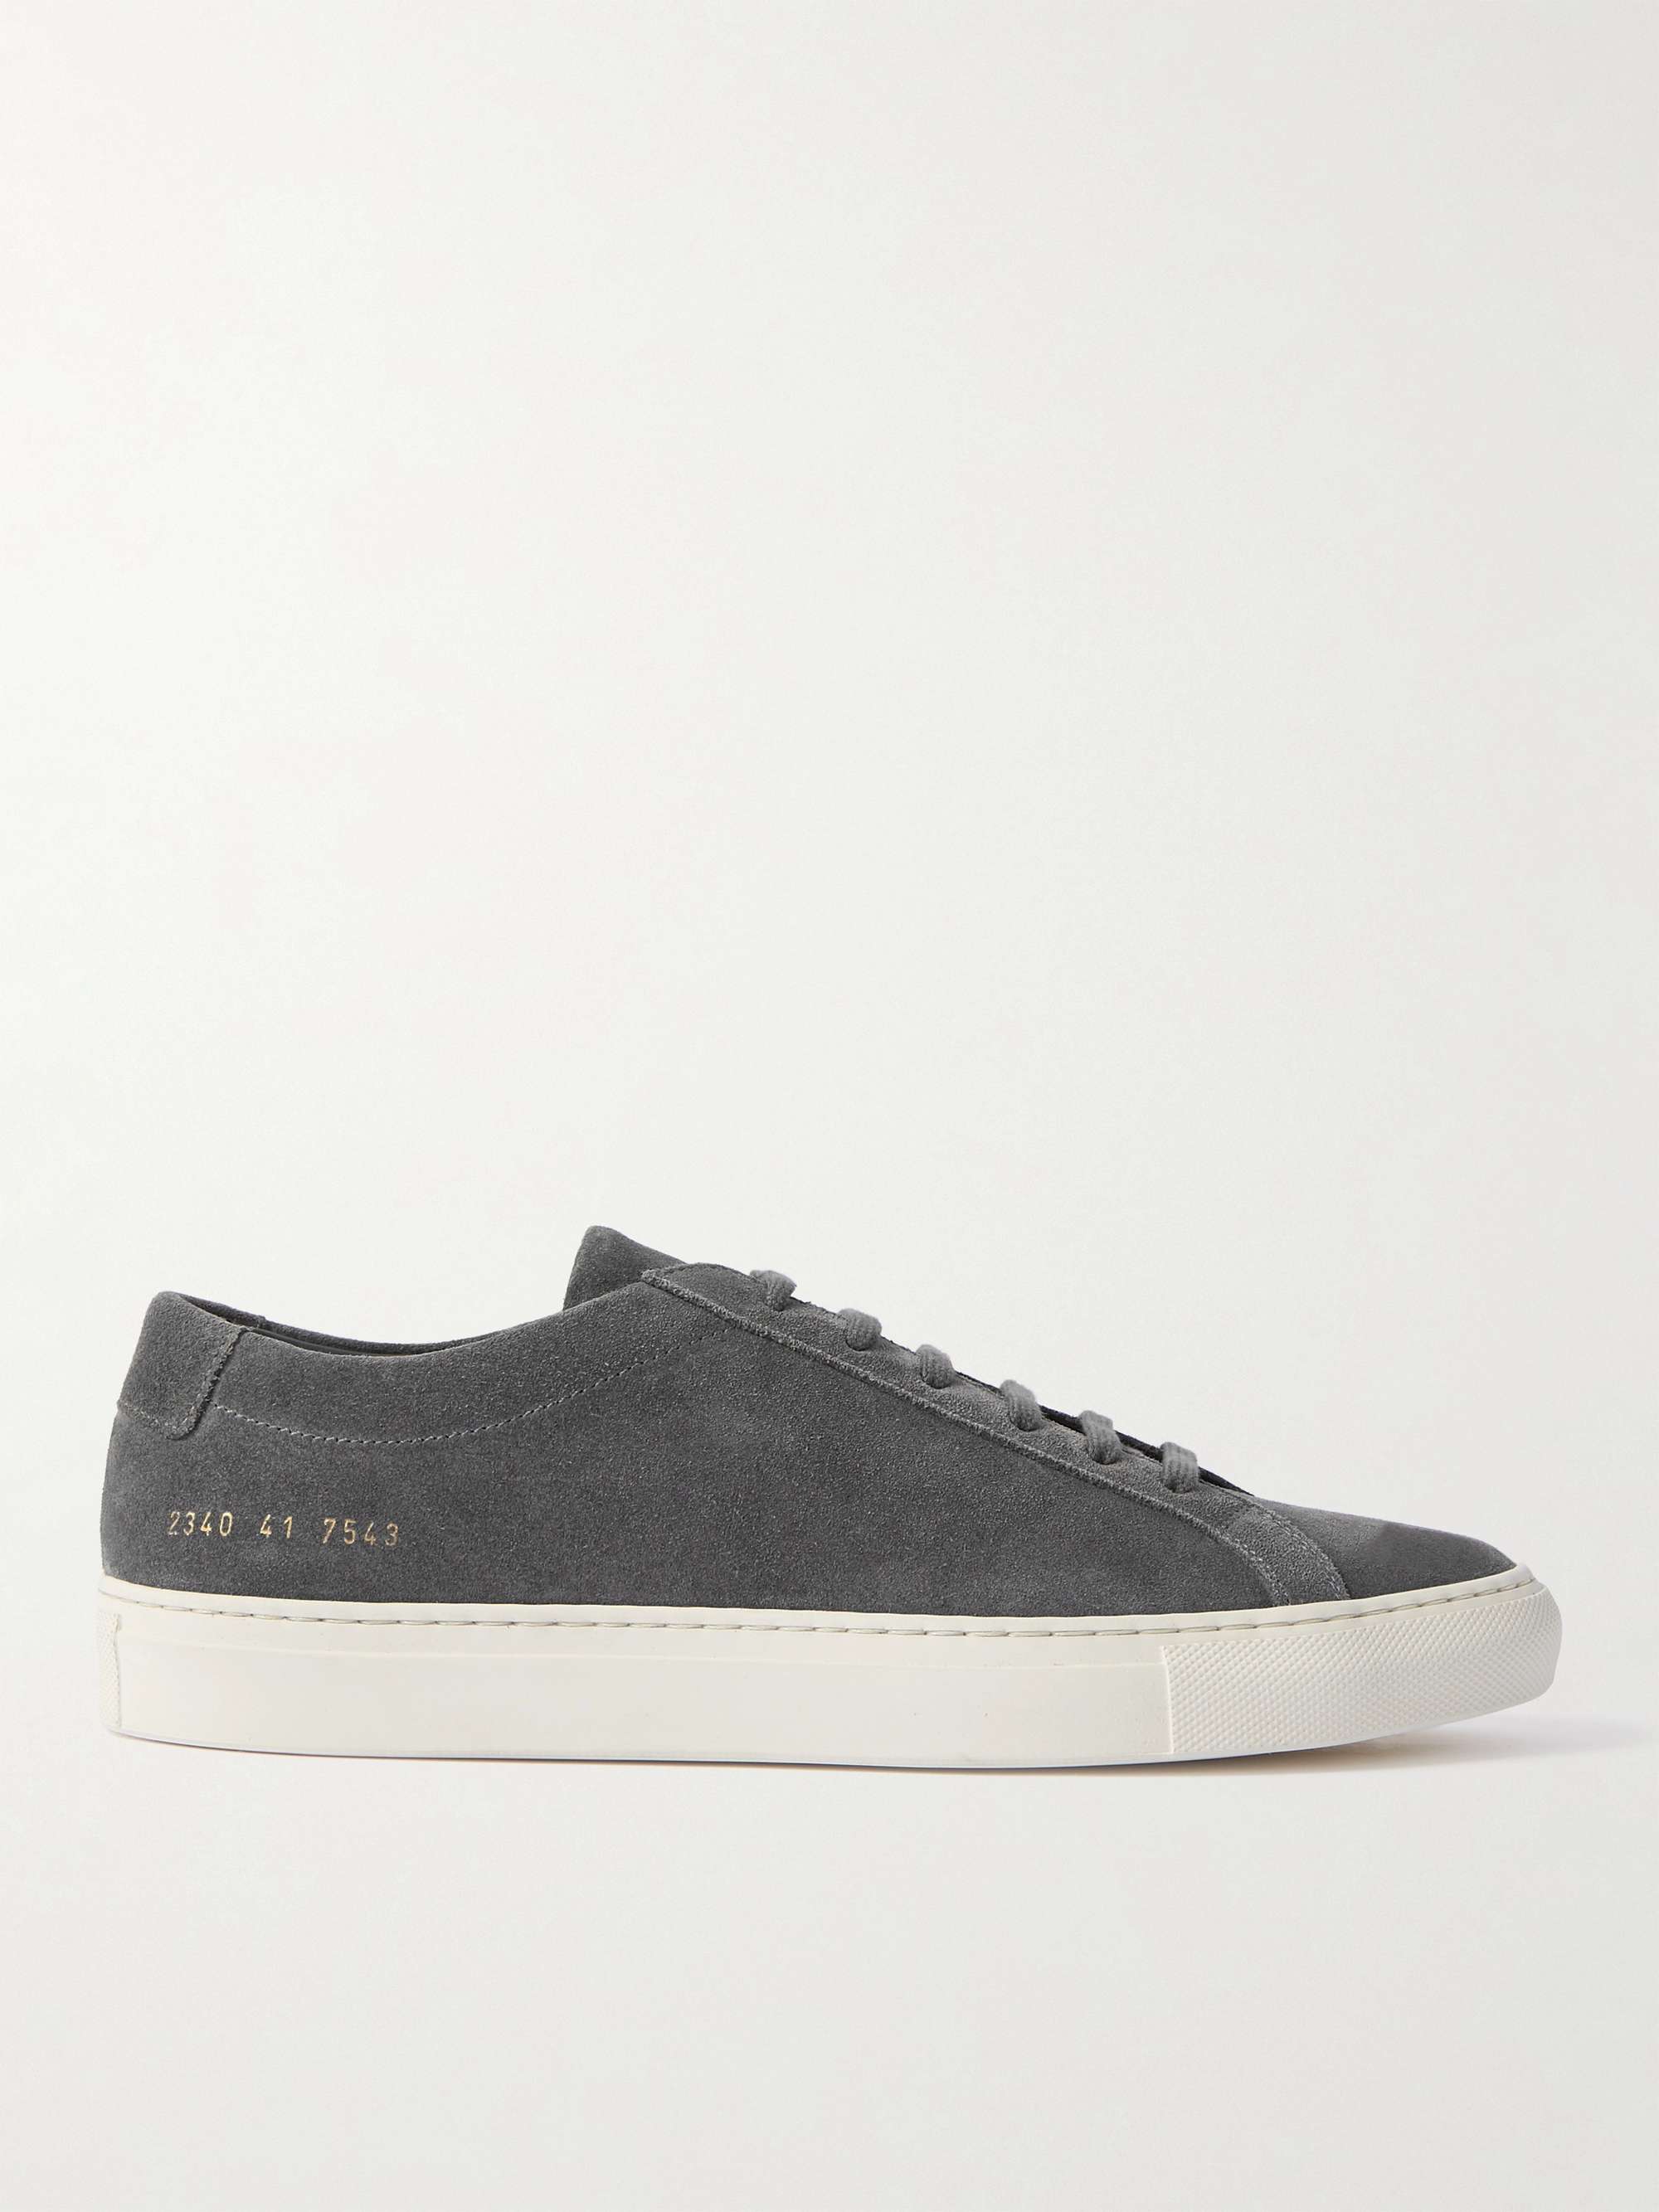 COMMON PROJECTS Achilles Low Suede Sneakers | MR PORTER